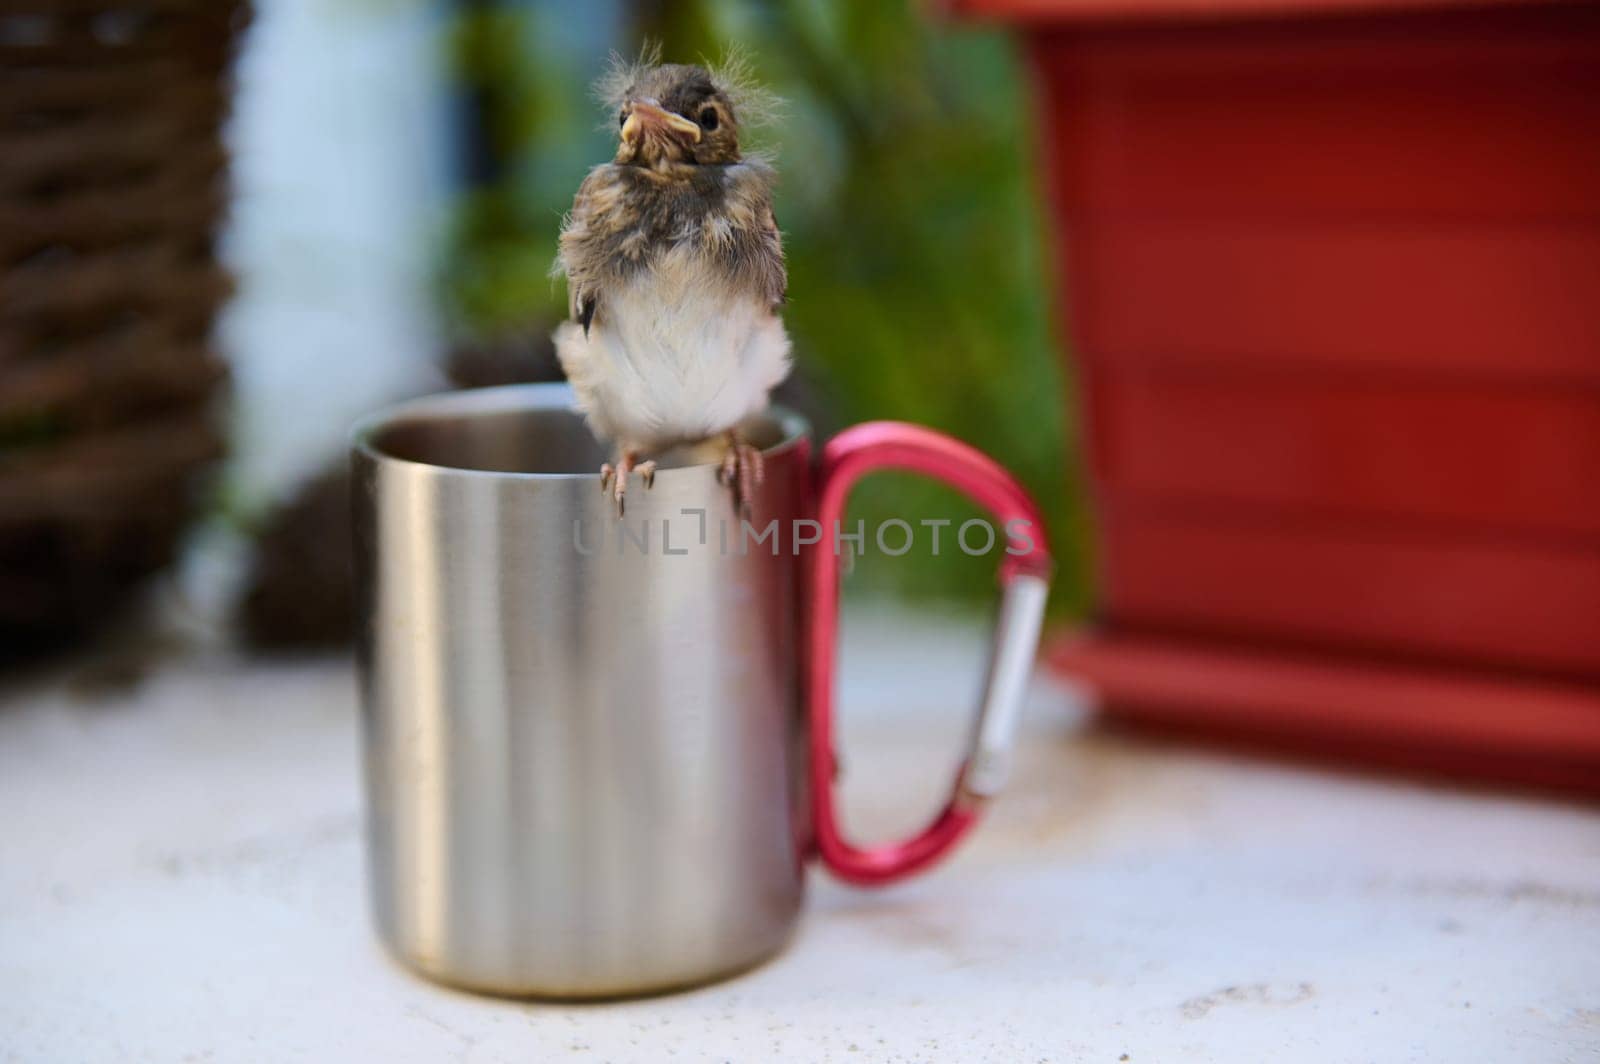 Cute baby bird sitting on stainless steel travel mug between a wicker basket and pots with flowers outdoors. Birds in nature. Animals themes. by artgf